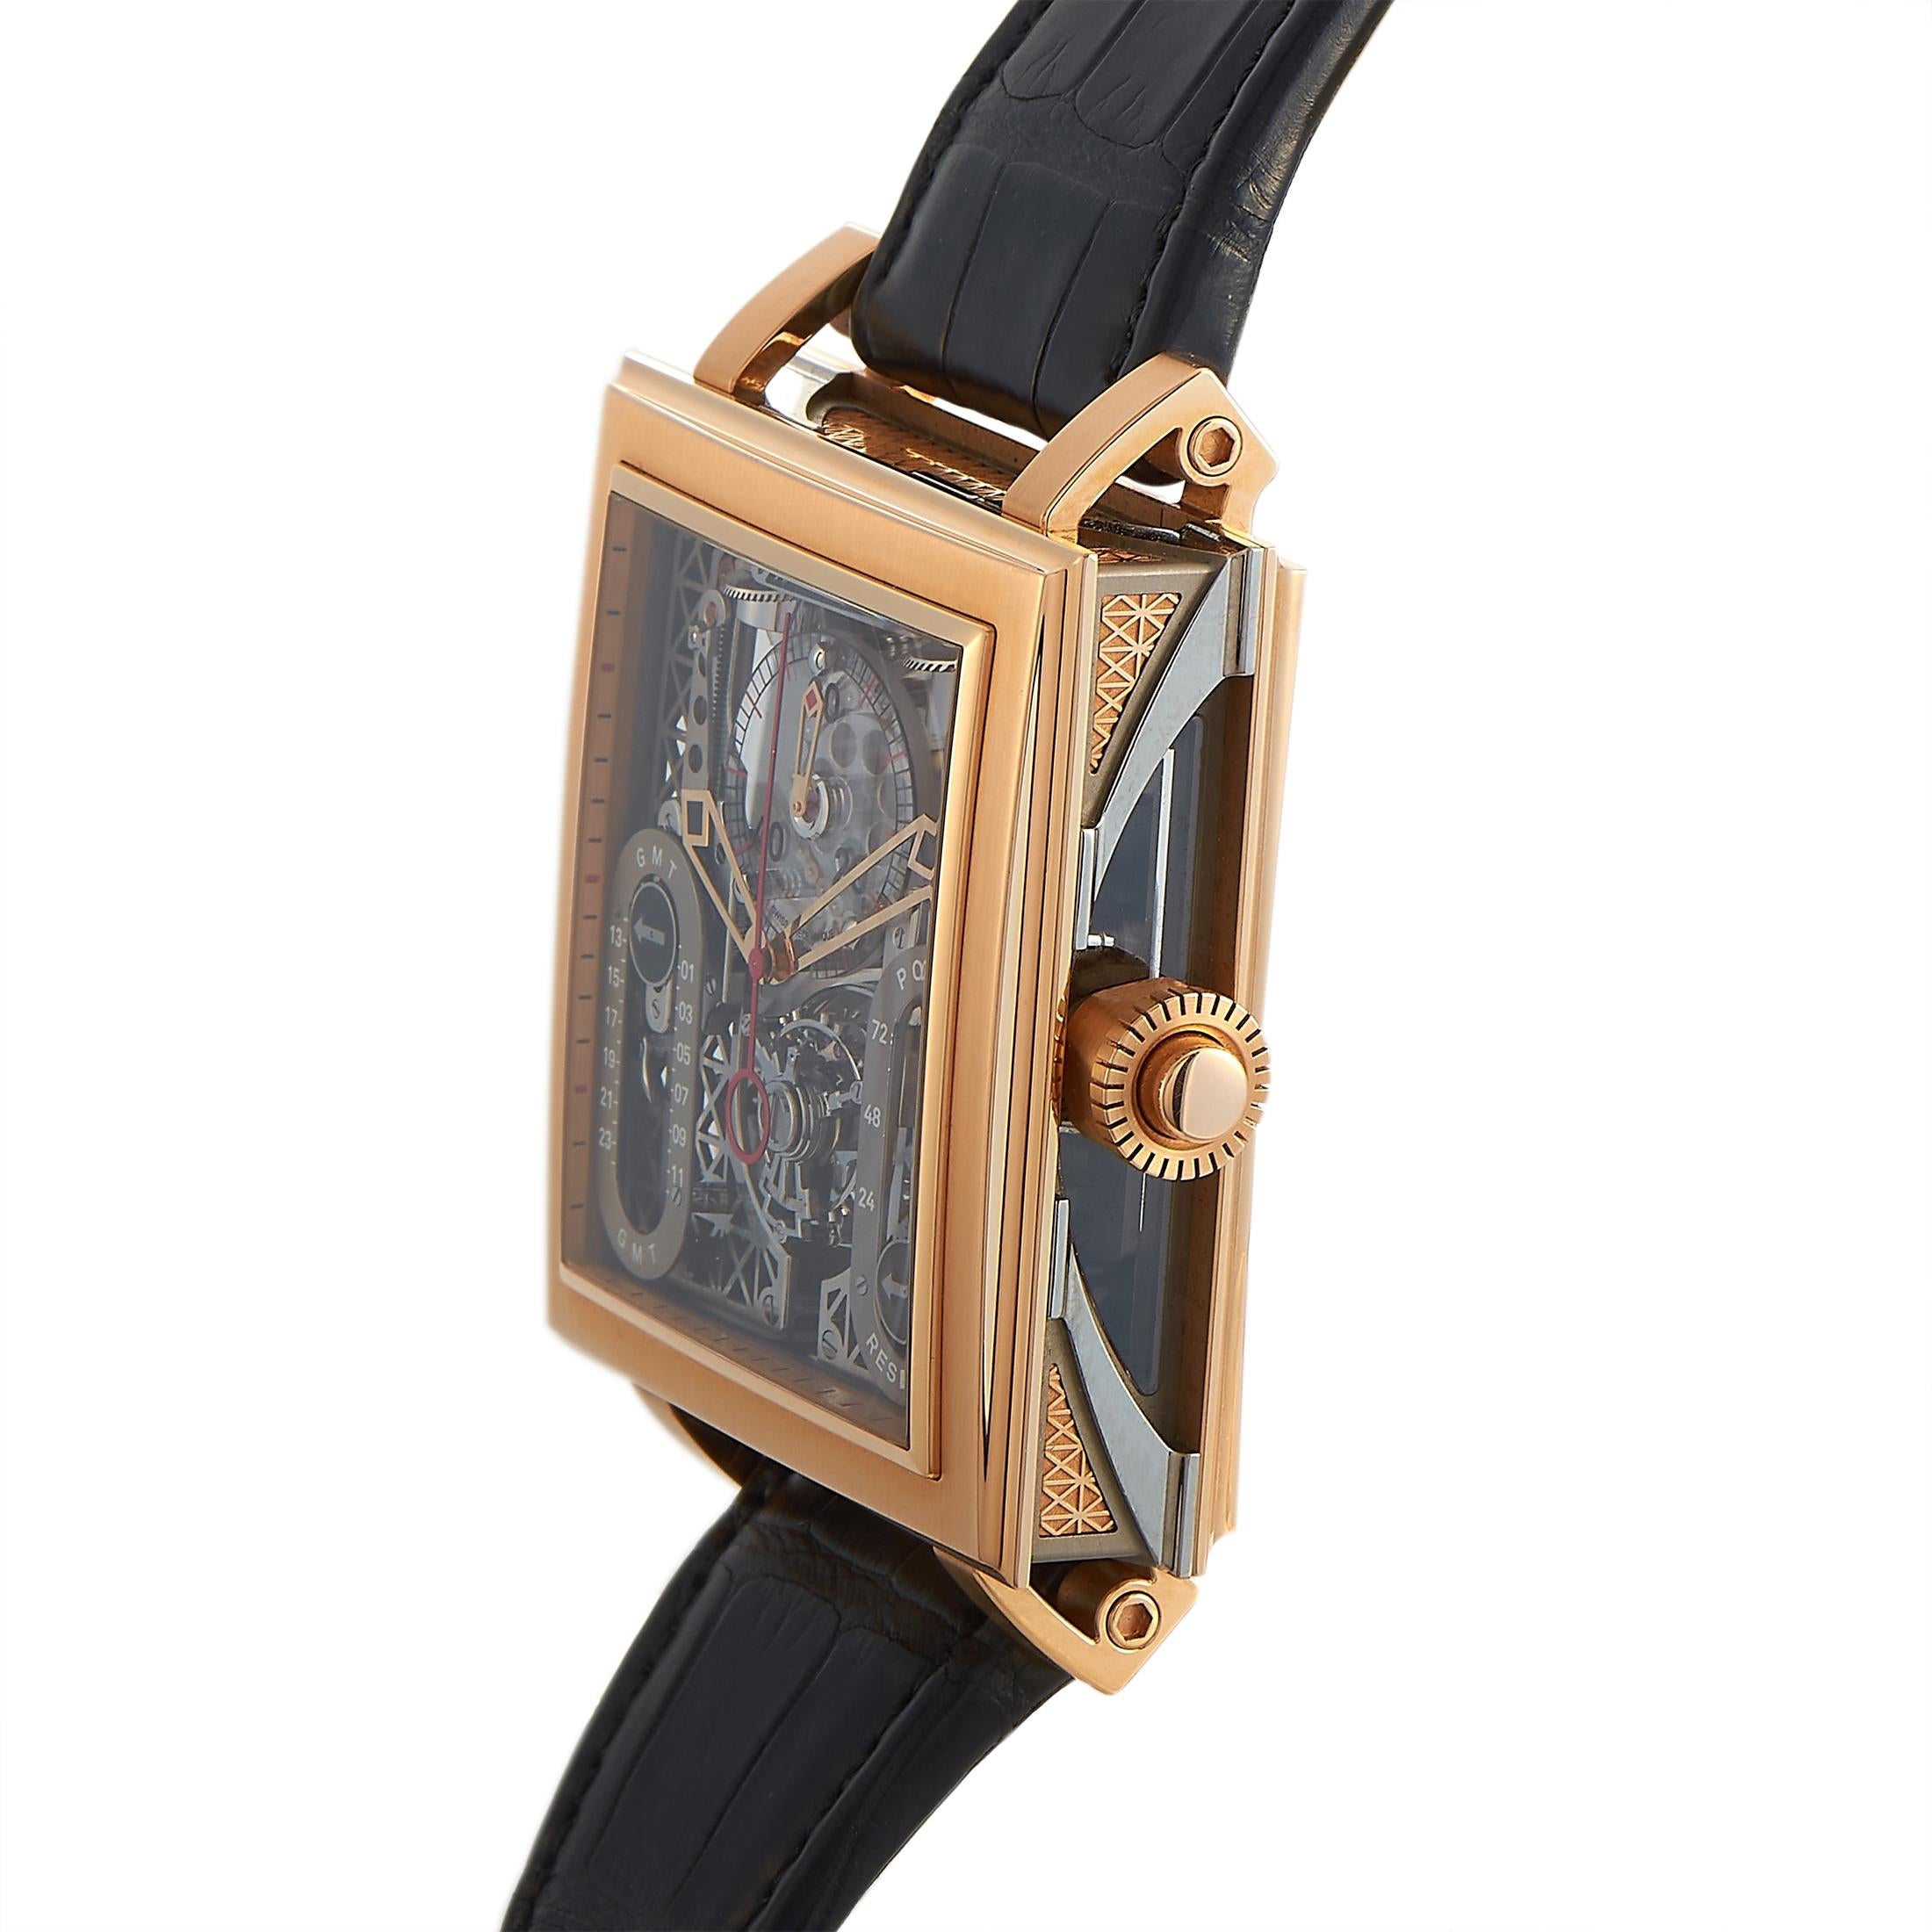 The Jean Dunand Palace 5100 Tourbillon GMT Square watch is a unique timepiece that boasts complex, elaborate design inspired by the modernist and luxurious Art Deco style.
 
 The watch is presented with a case made out of 18K rose gold and titanium